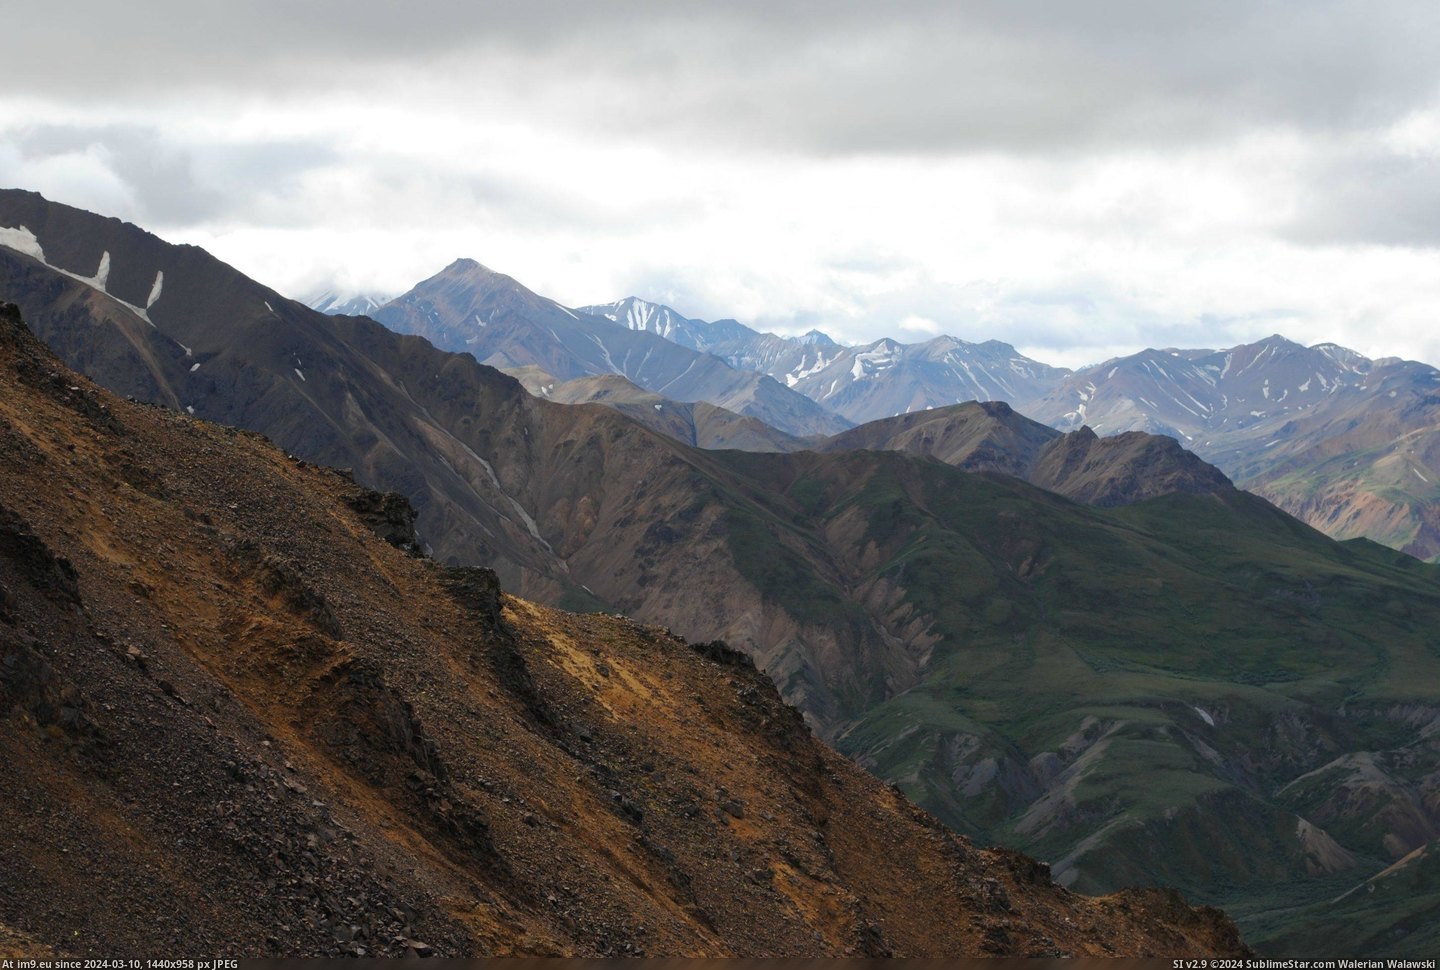 #Park #National #Majestic #3872x2592 #Denali #Summer #Mountains [Earthporn] The majestic mountains of Denali National Park during summer [3872x2592] [OC] Pic. (Image of album My r/EARTHPORN favs))